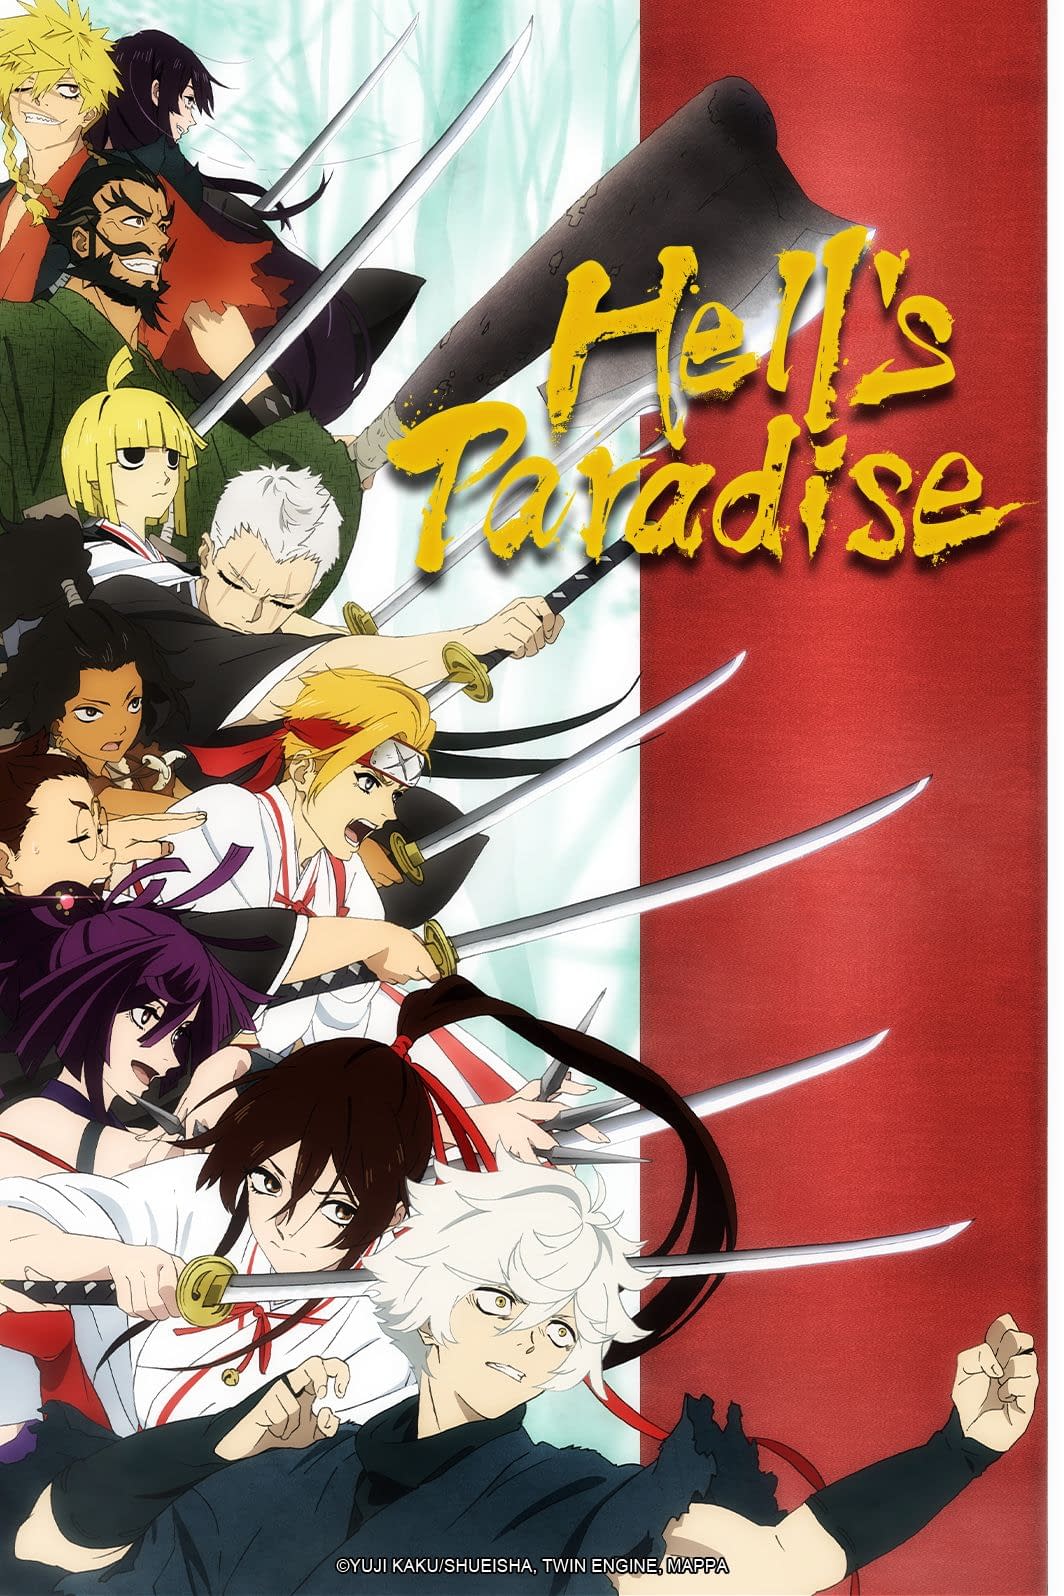 Hell's Paradise TV Anime Season 2 Offers More Life and Death